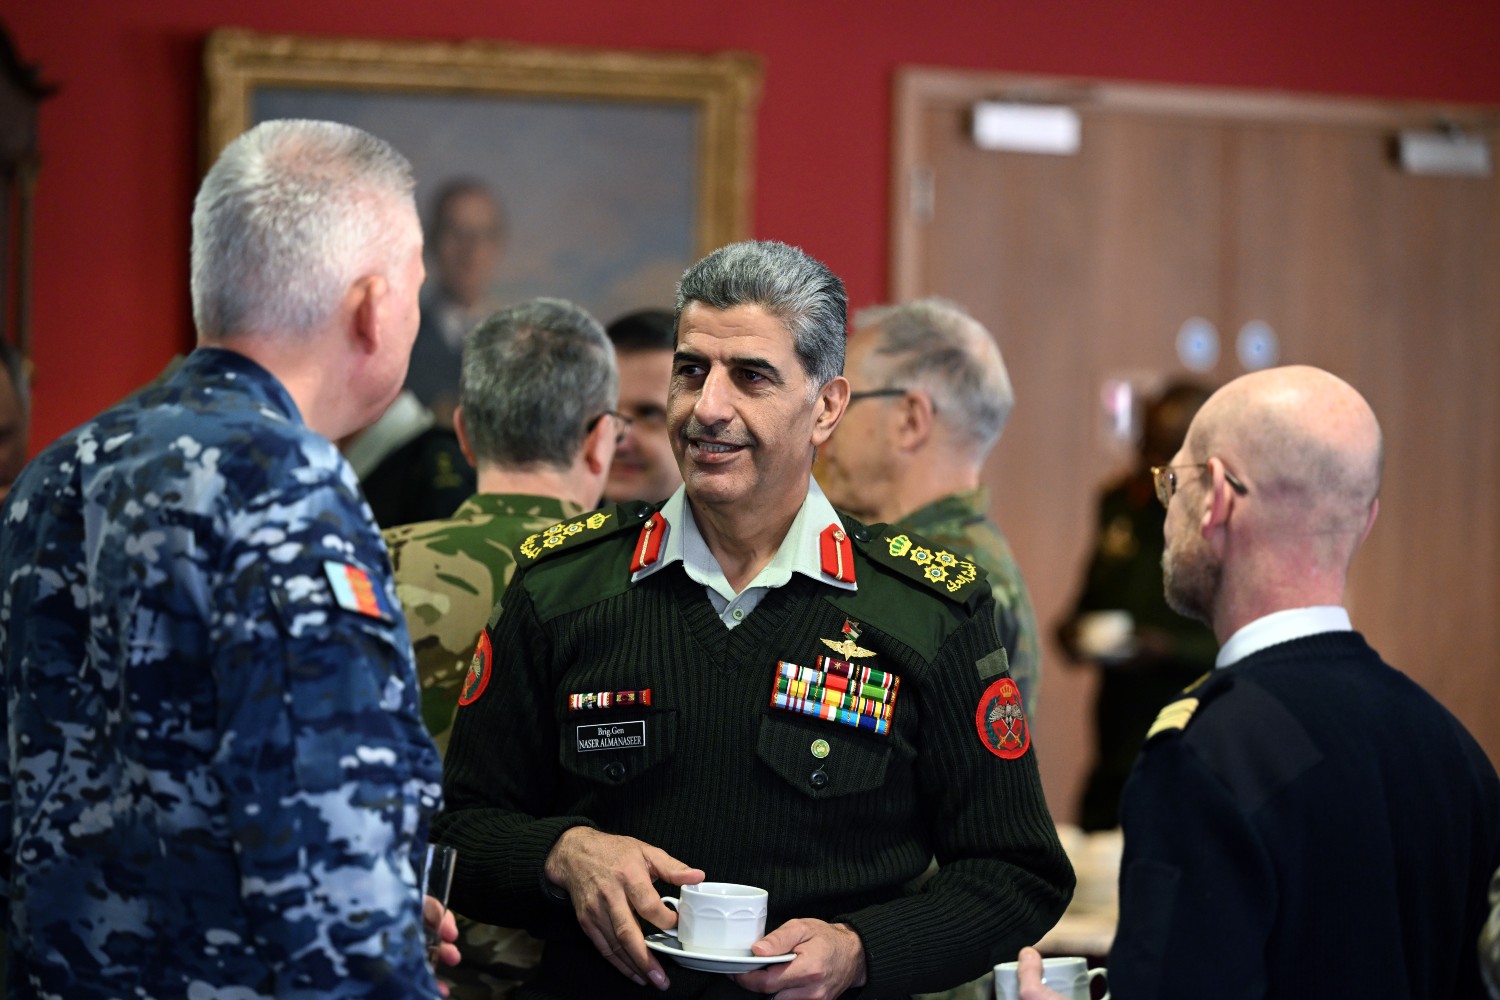 International Defence Attaches talking while drinking coffee.